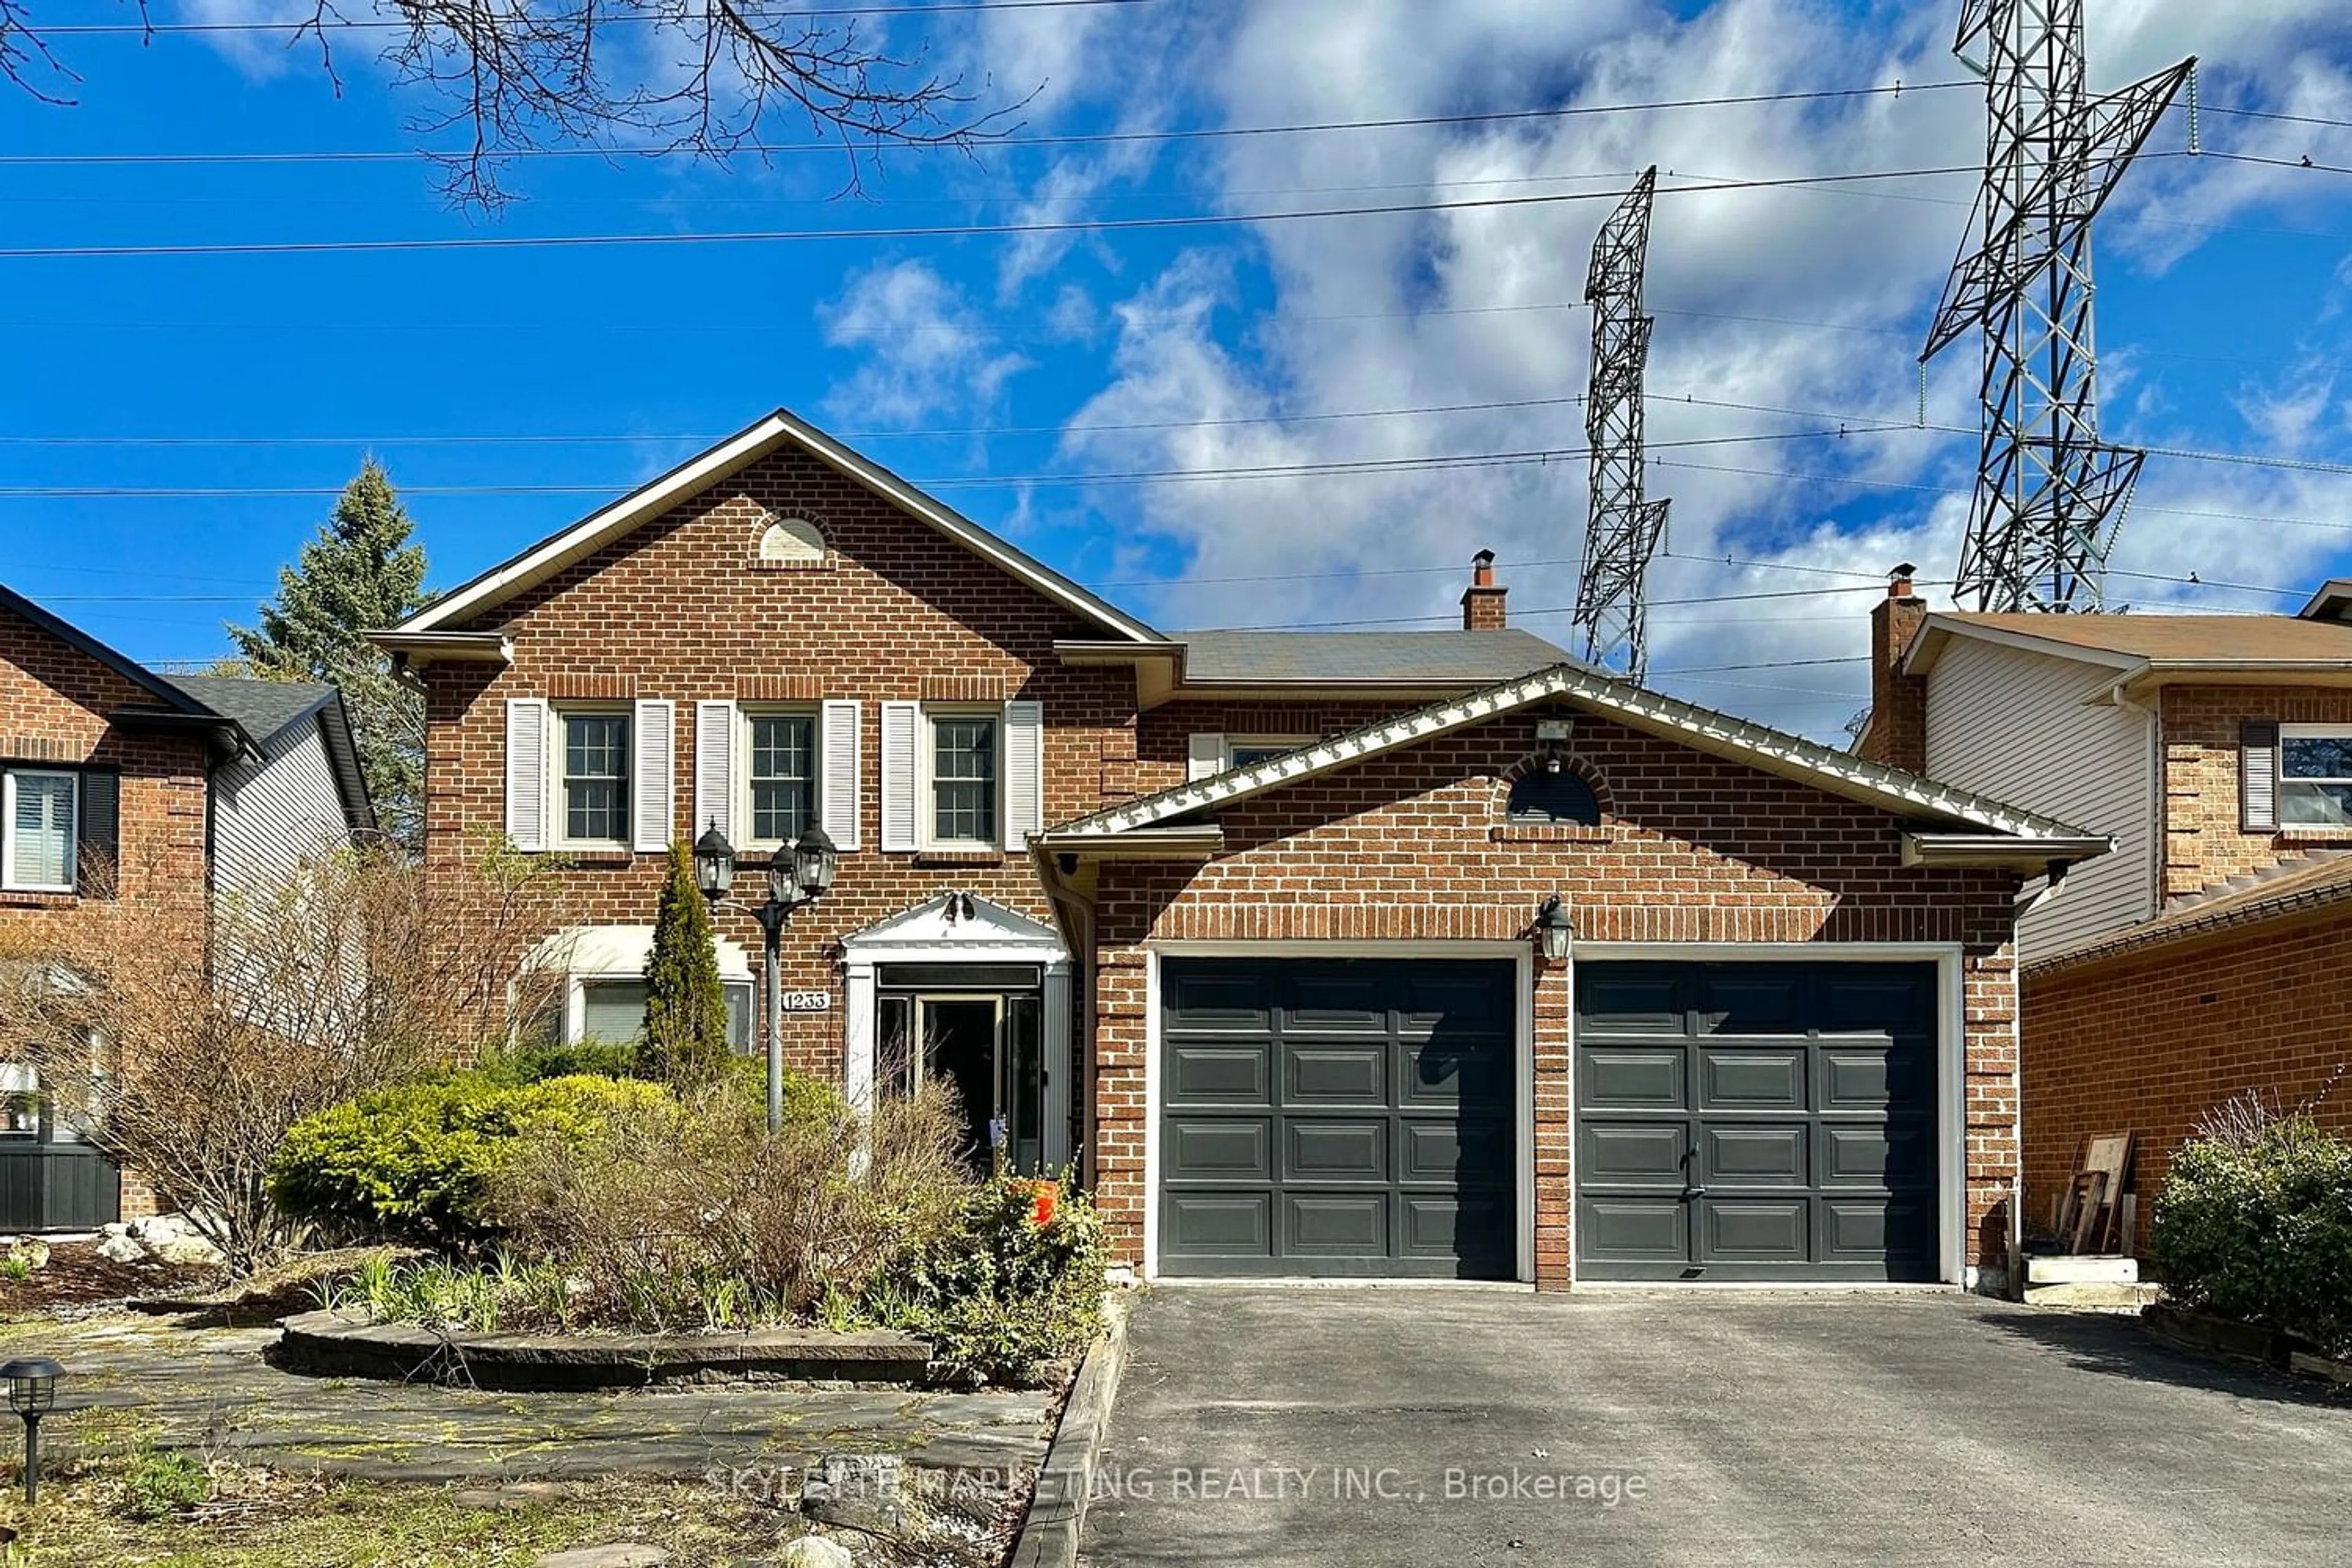 Home with brick exterior material for 1233 Fieldstone Circ, Pickering Ontario L1X 1B9